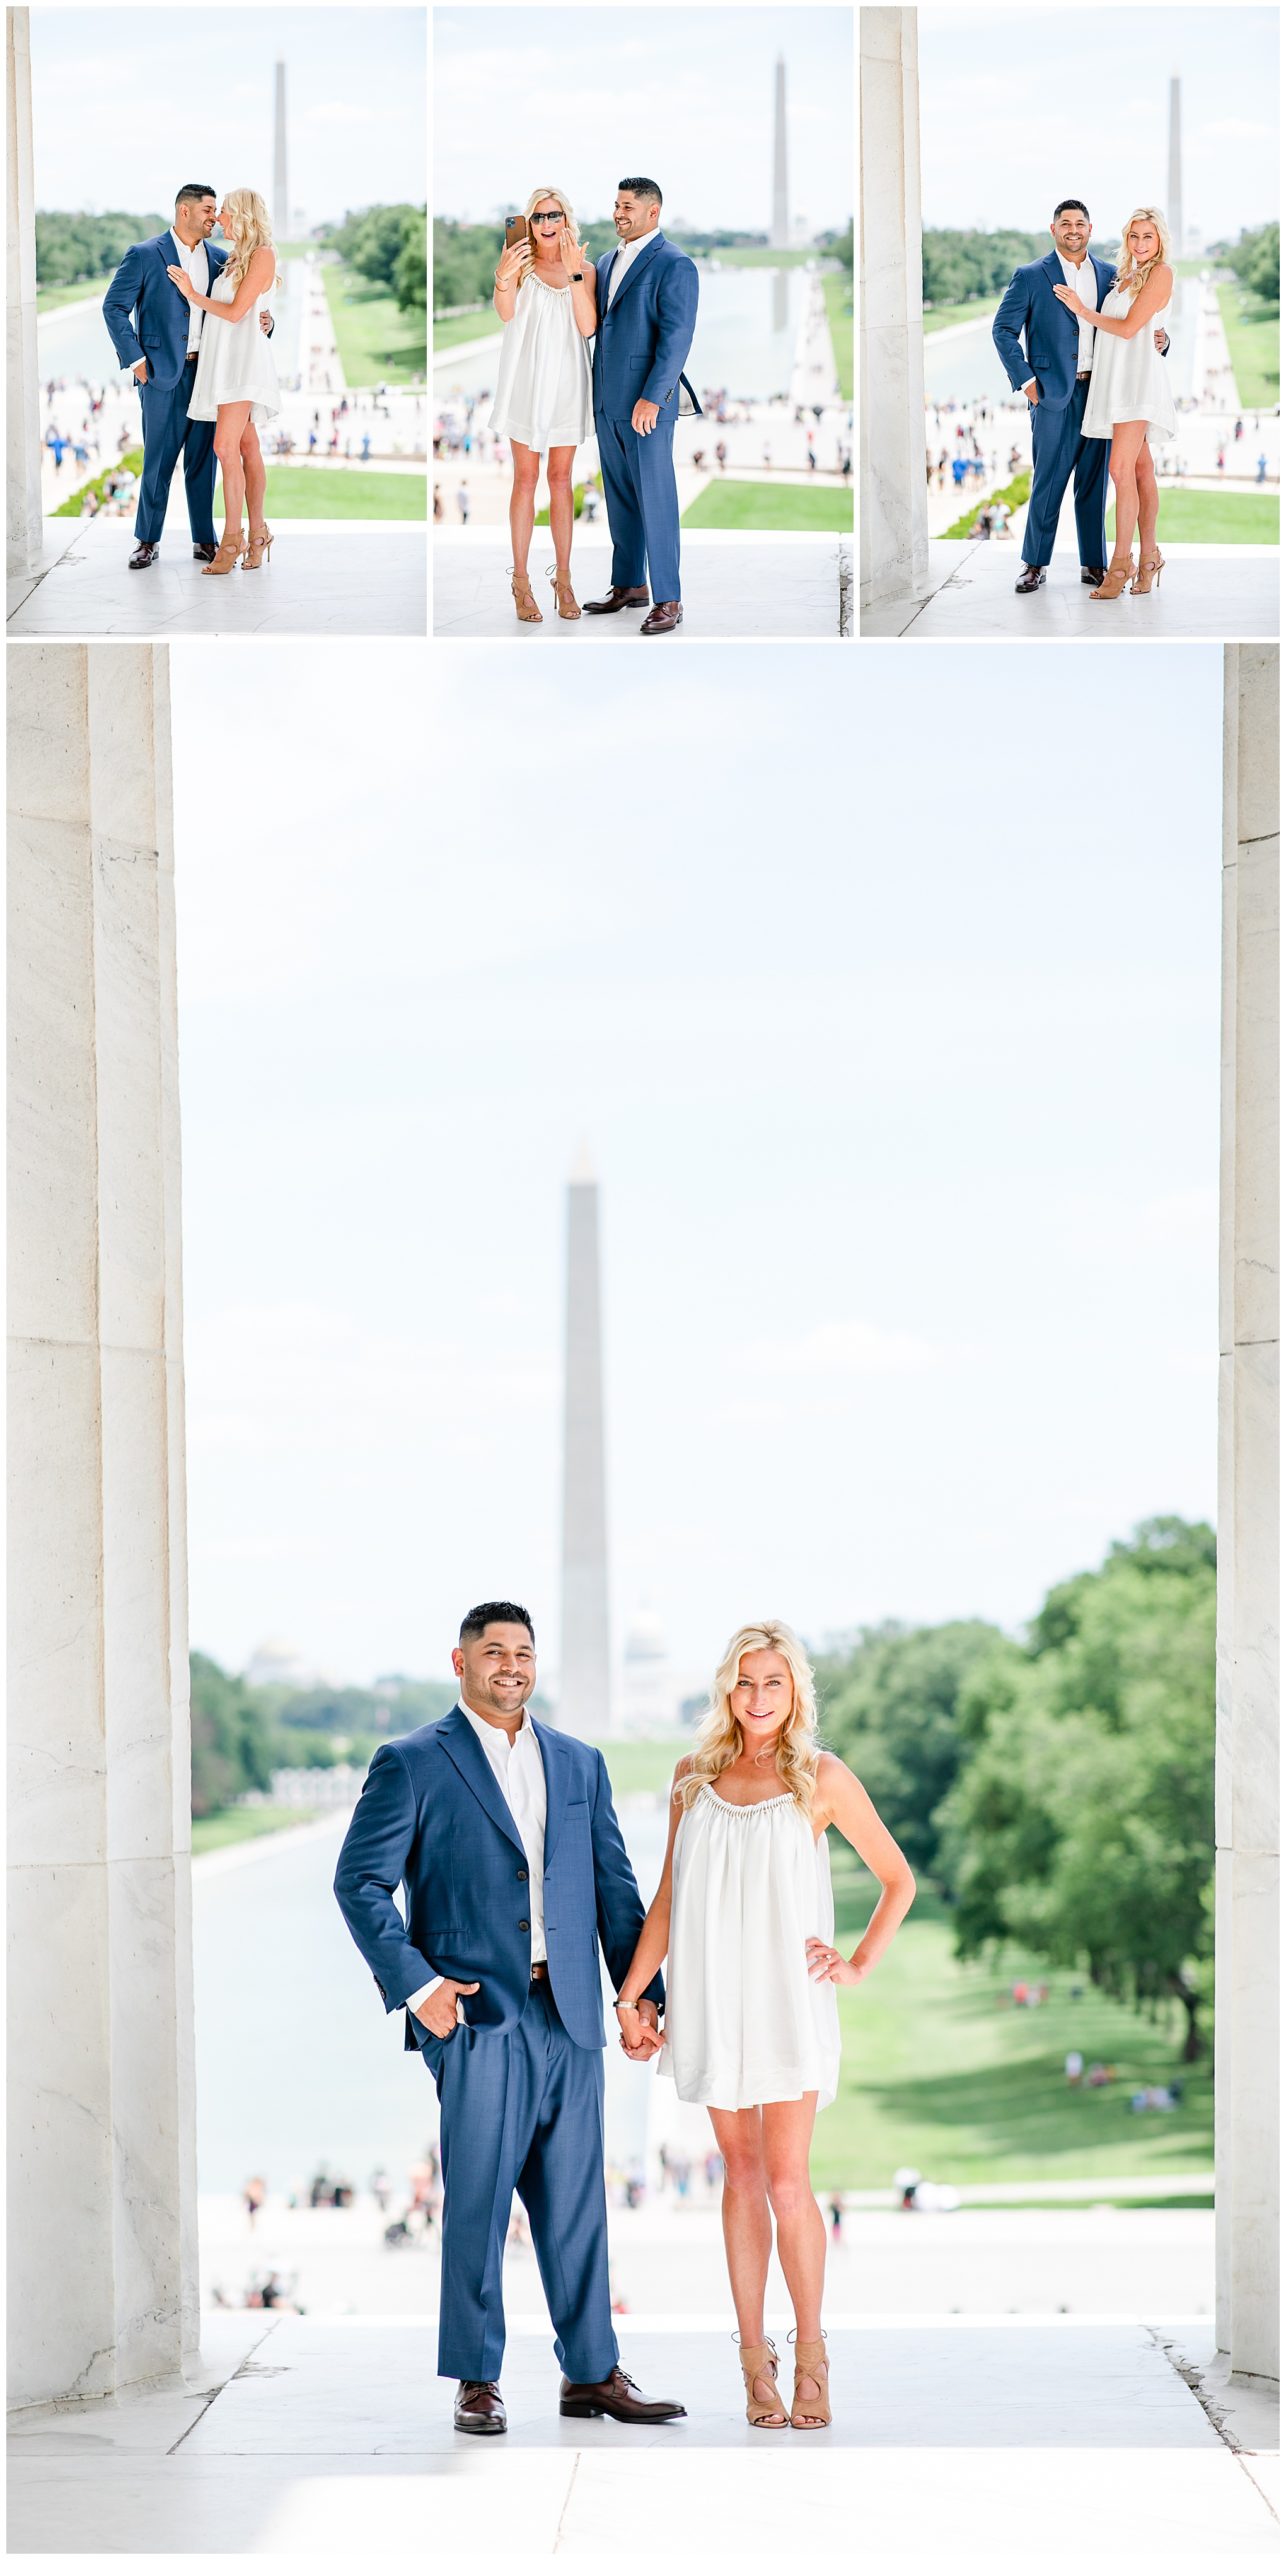 Lincoln Memorial proposal, Lincoln Memorial surprise proposal, DC surprise proposal, surprise proposal DC, DC proposal photographer, DC engagement, DC engagement photographer, Rachel E.H. Photography, summer proposal, proposal ideas, Washington Monument, engaged couple